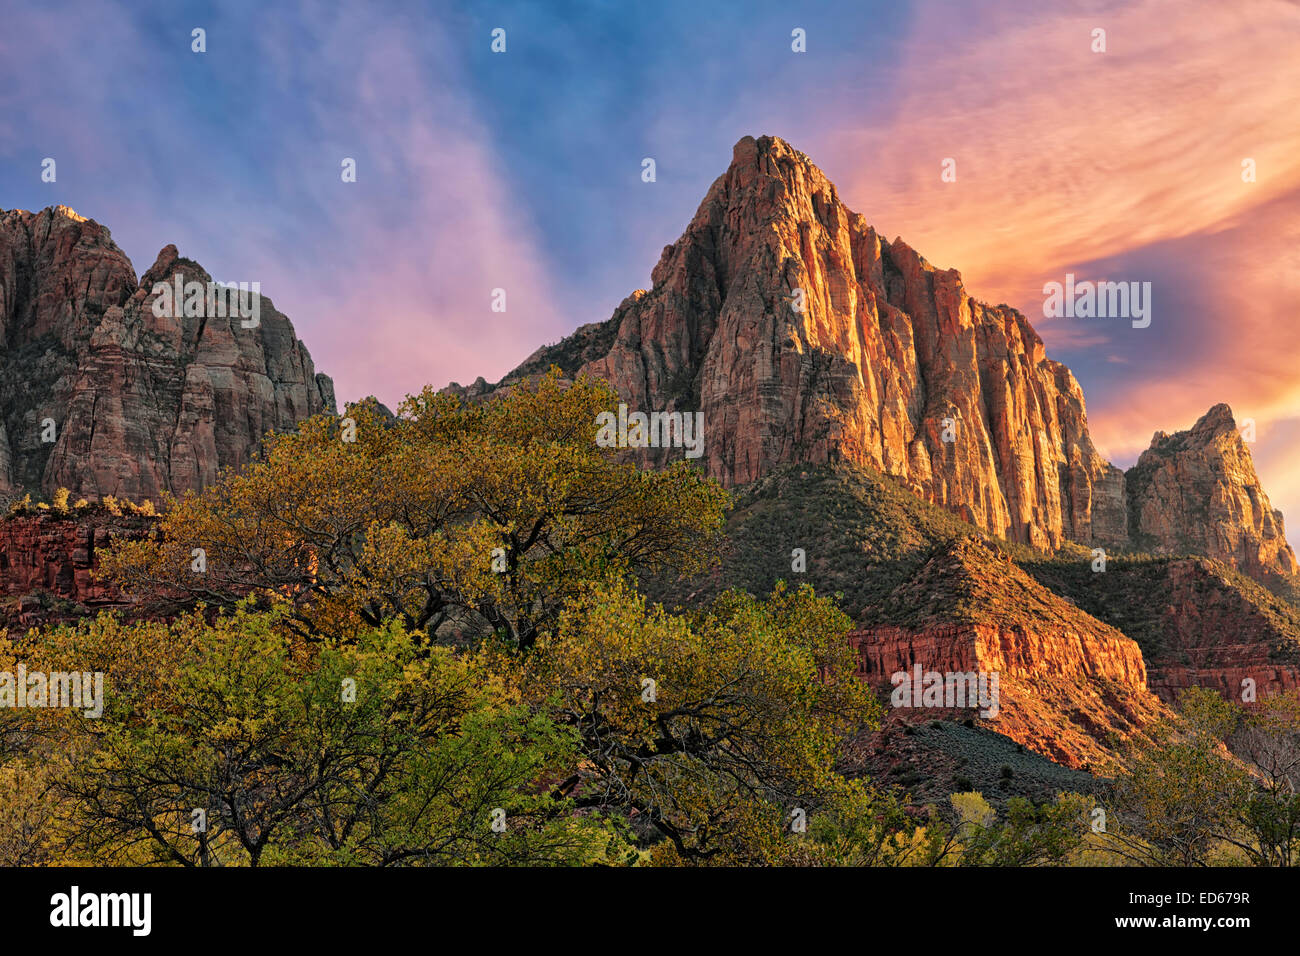 Autumn sunset over The Watchman in Utah's Zion National Park. Stock Photo